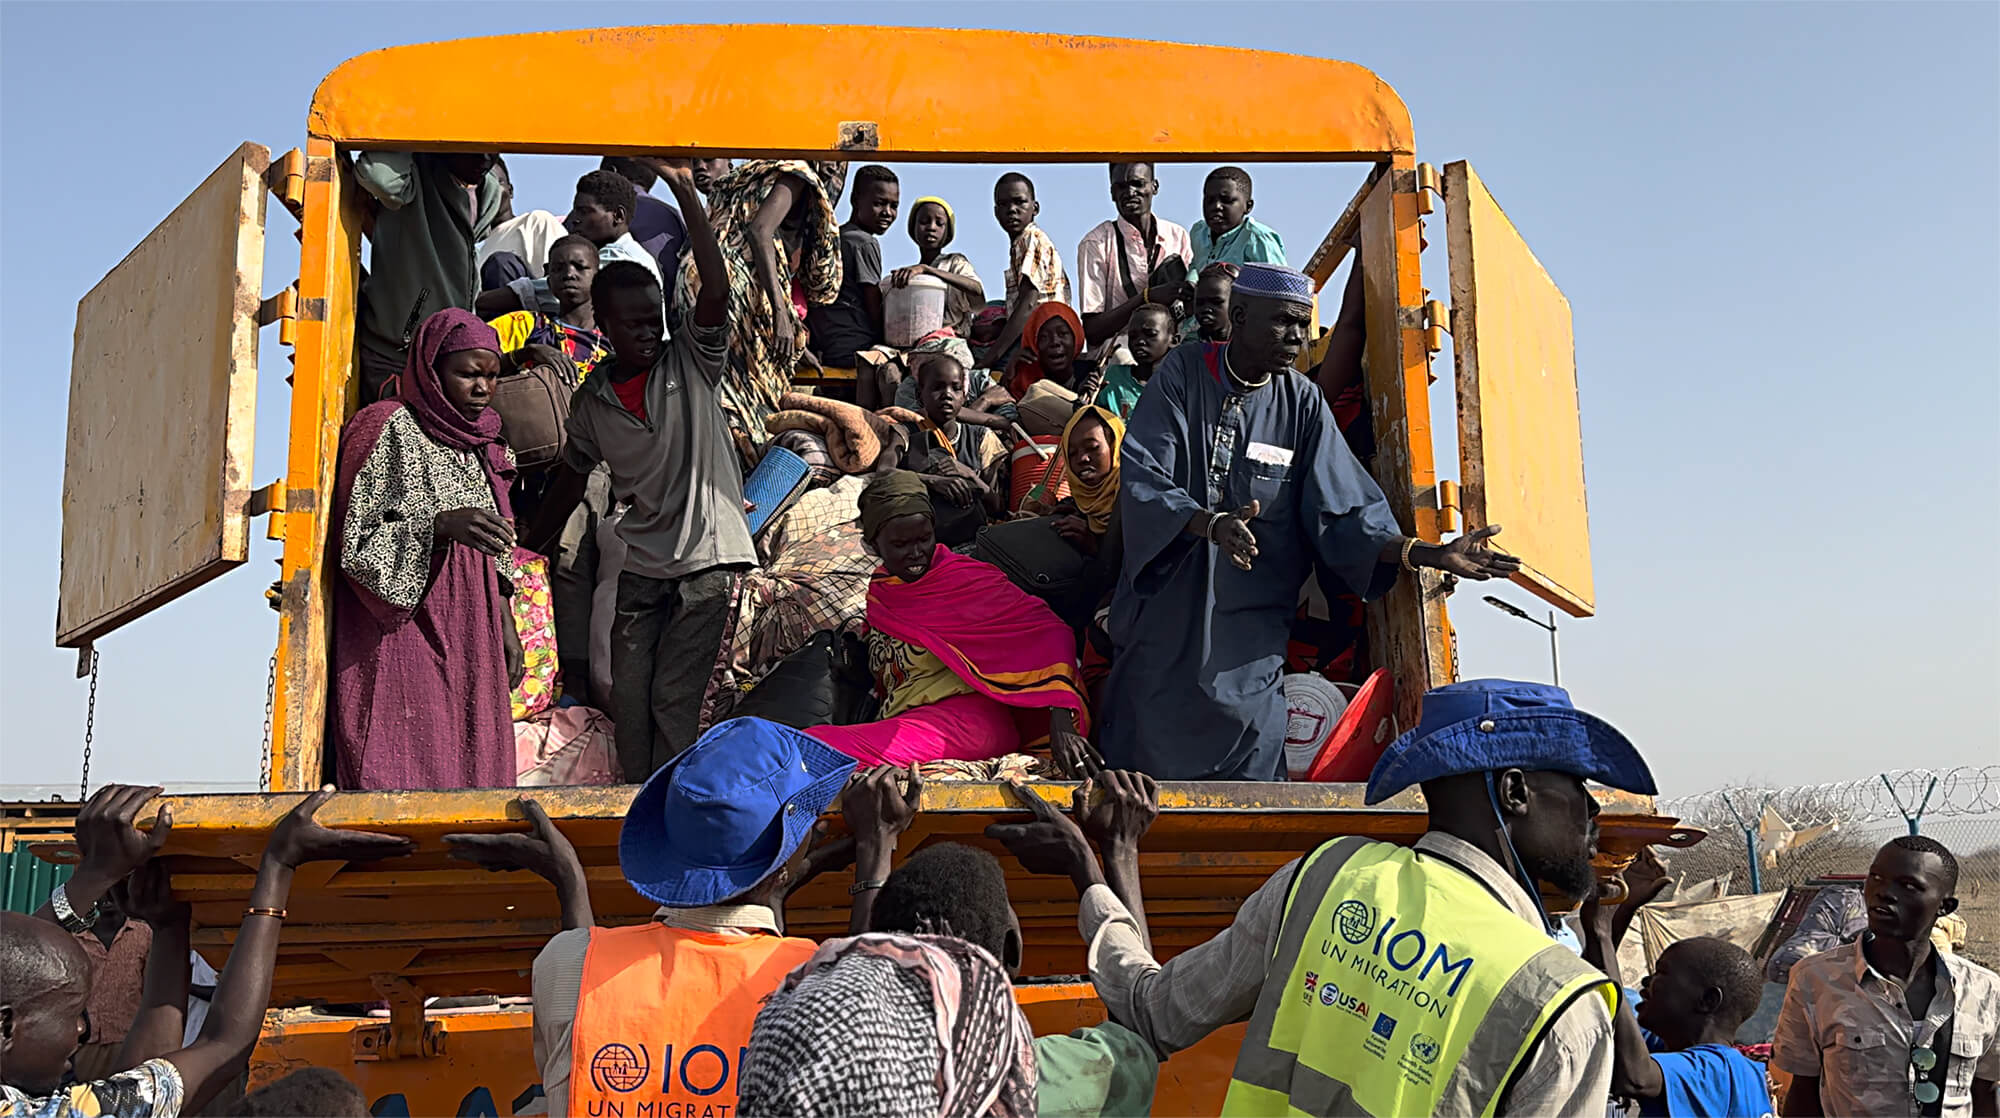 Returnees from the transit camps in Renk, South Sudan, board a truck that will take them to the port in Renk. There, a boat will transport them and their belongings along the White Nile River to Malakal.